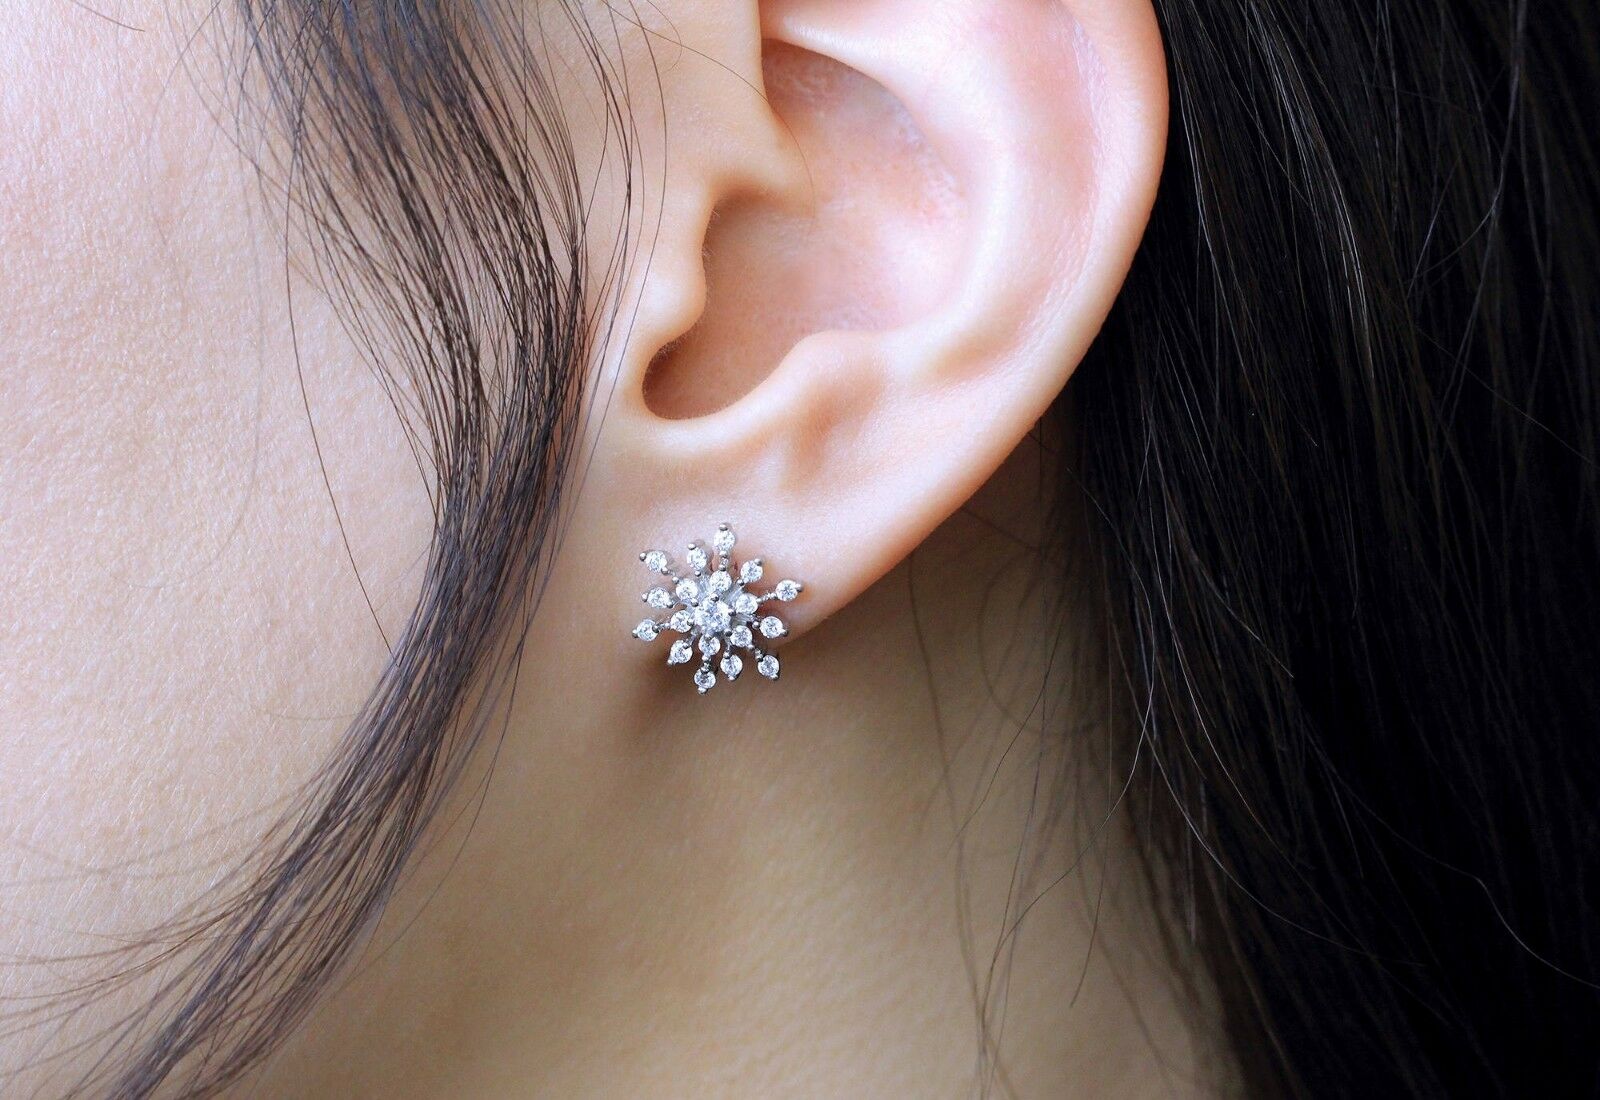 Sparkling Snowflake Earrings - Perfect Gift for Any Occasion | Belle Fever  – BELLE FEVER